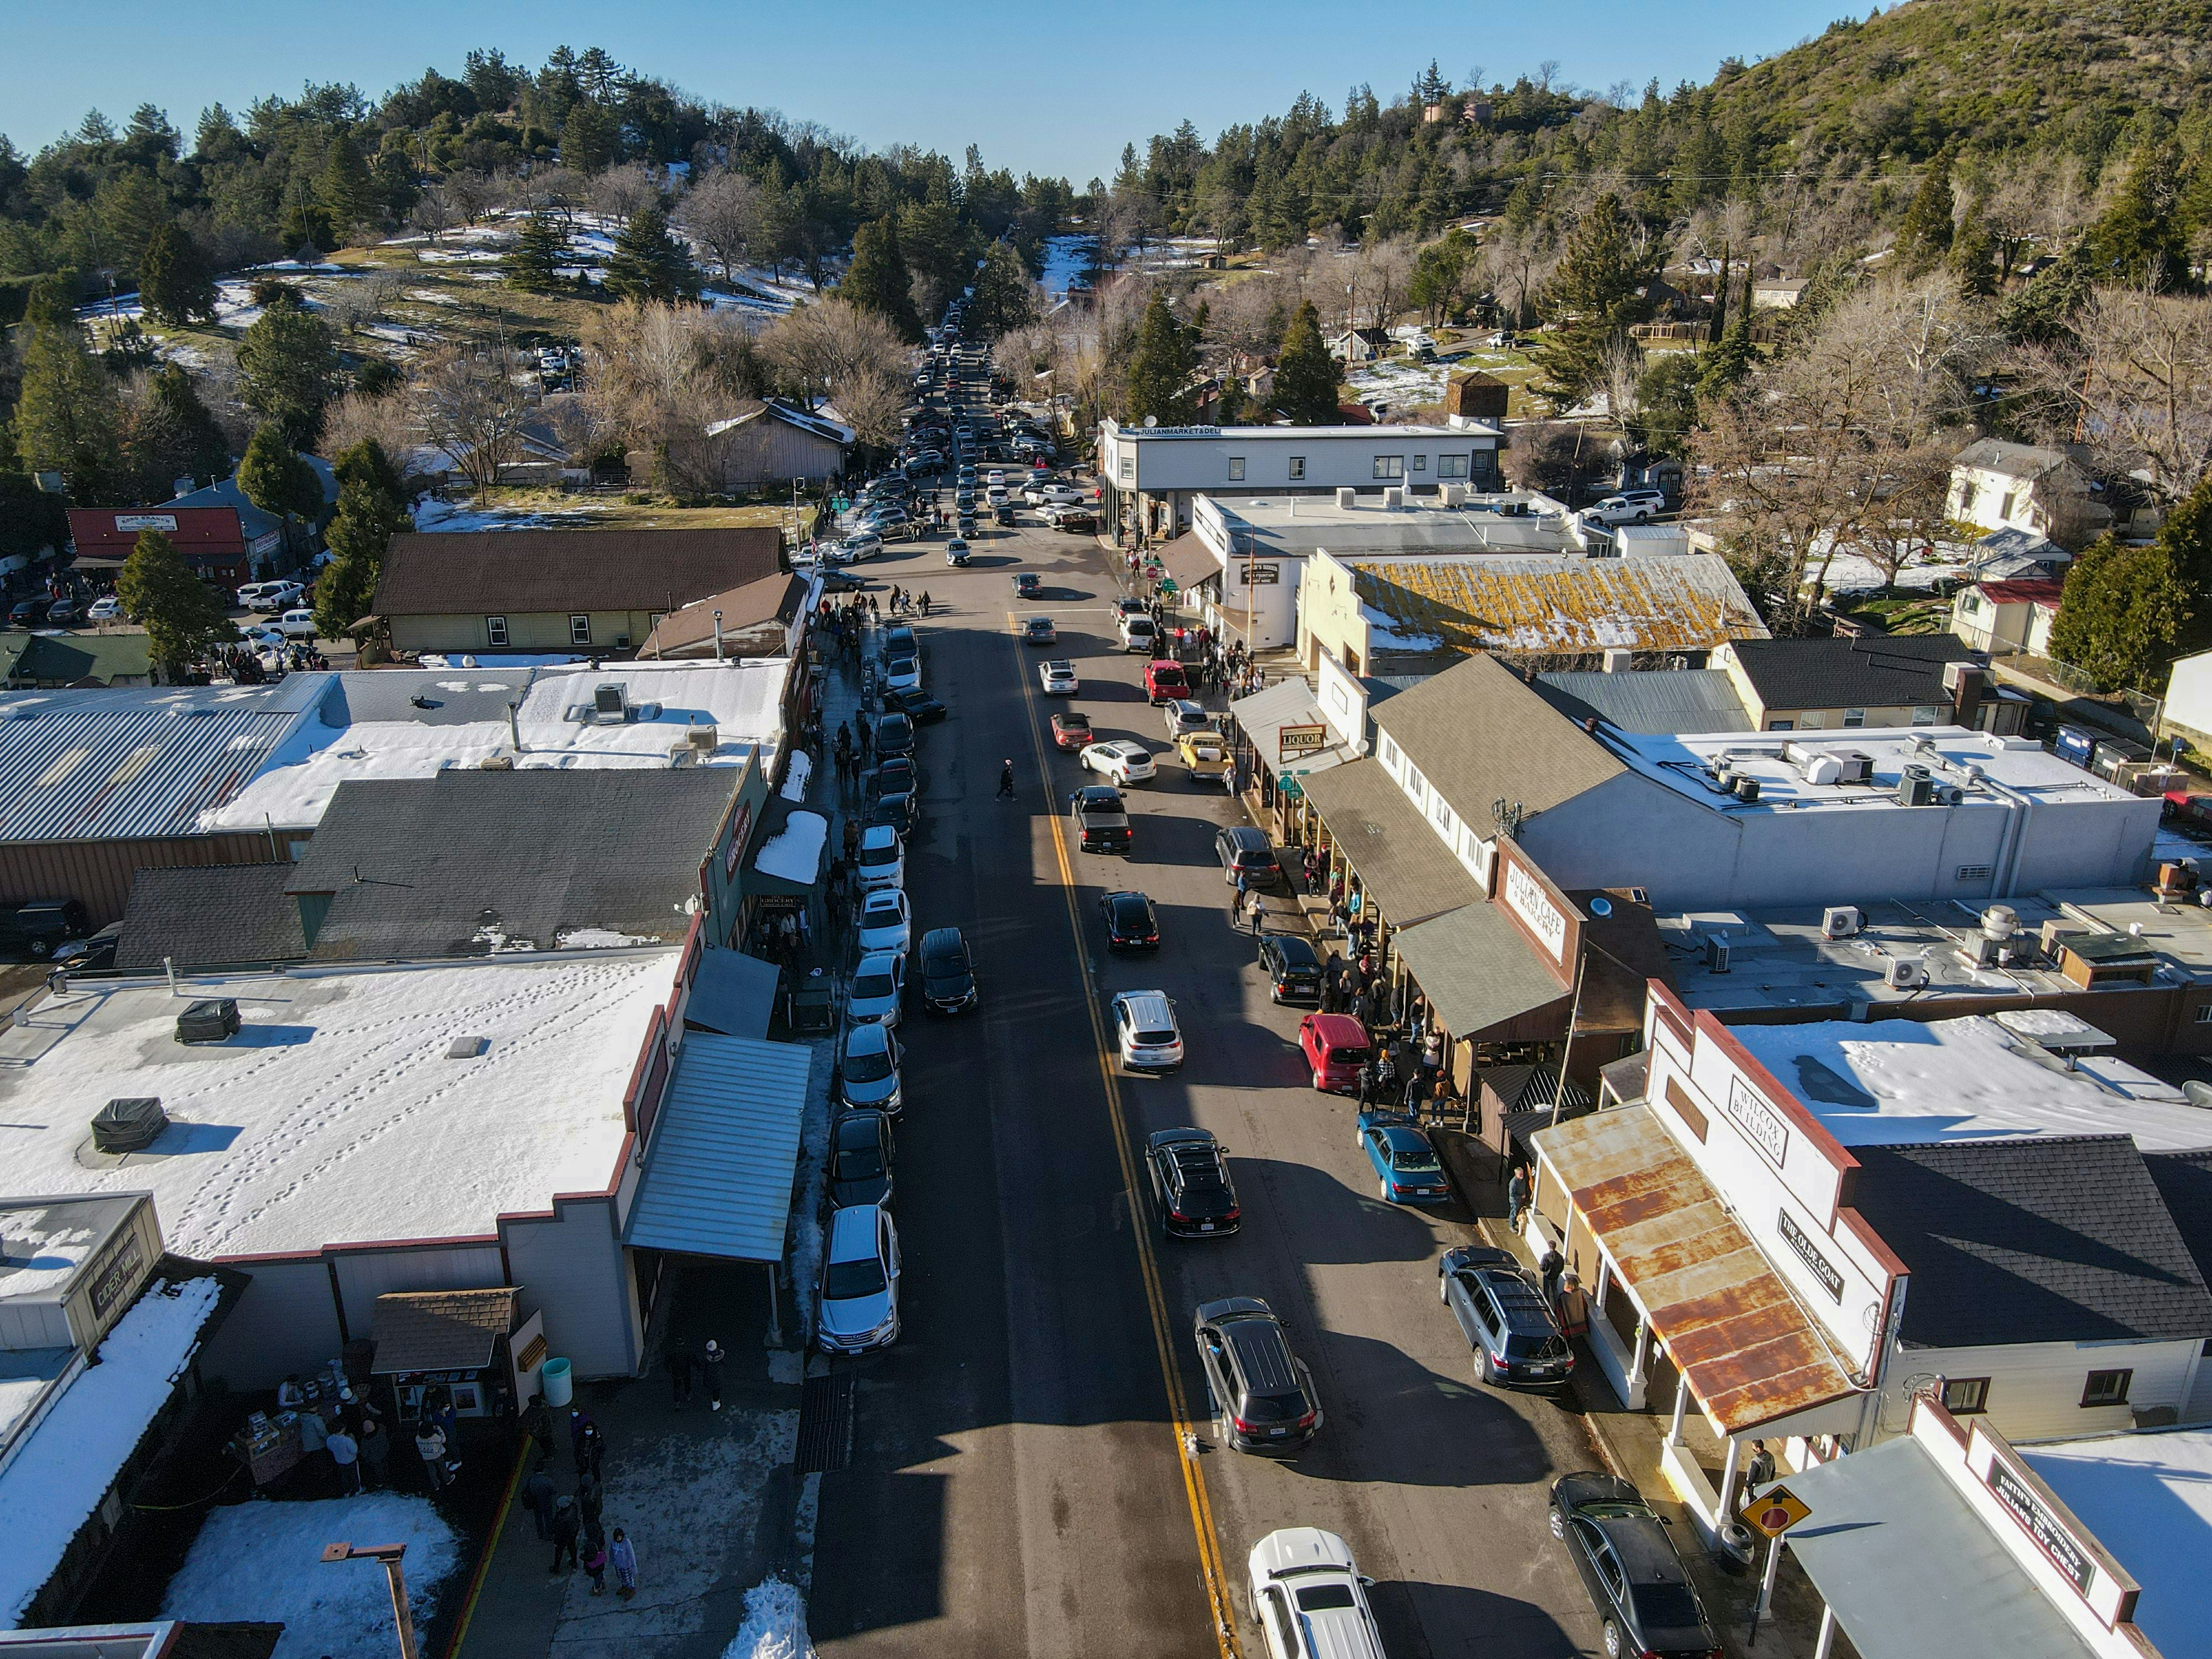 The historic downtown area of Julian in California